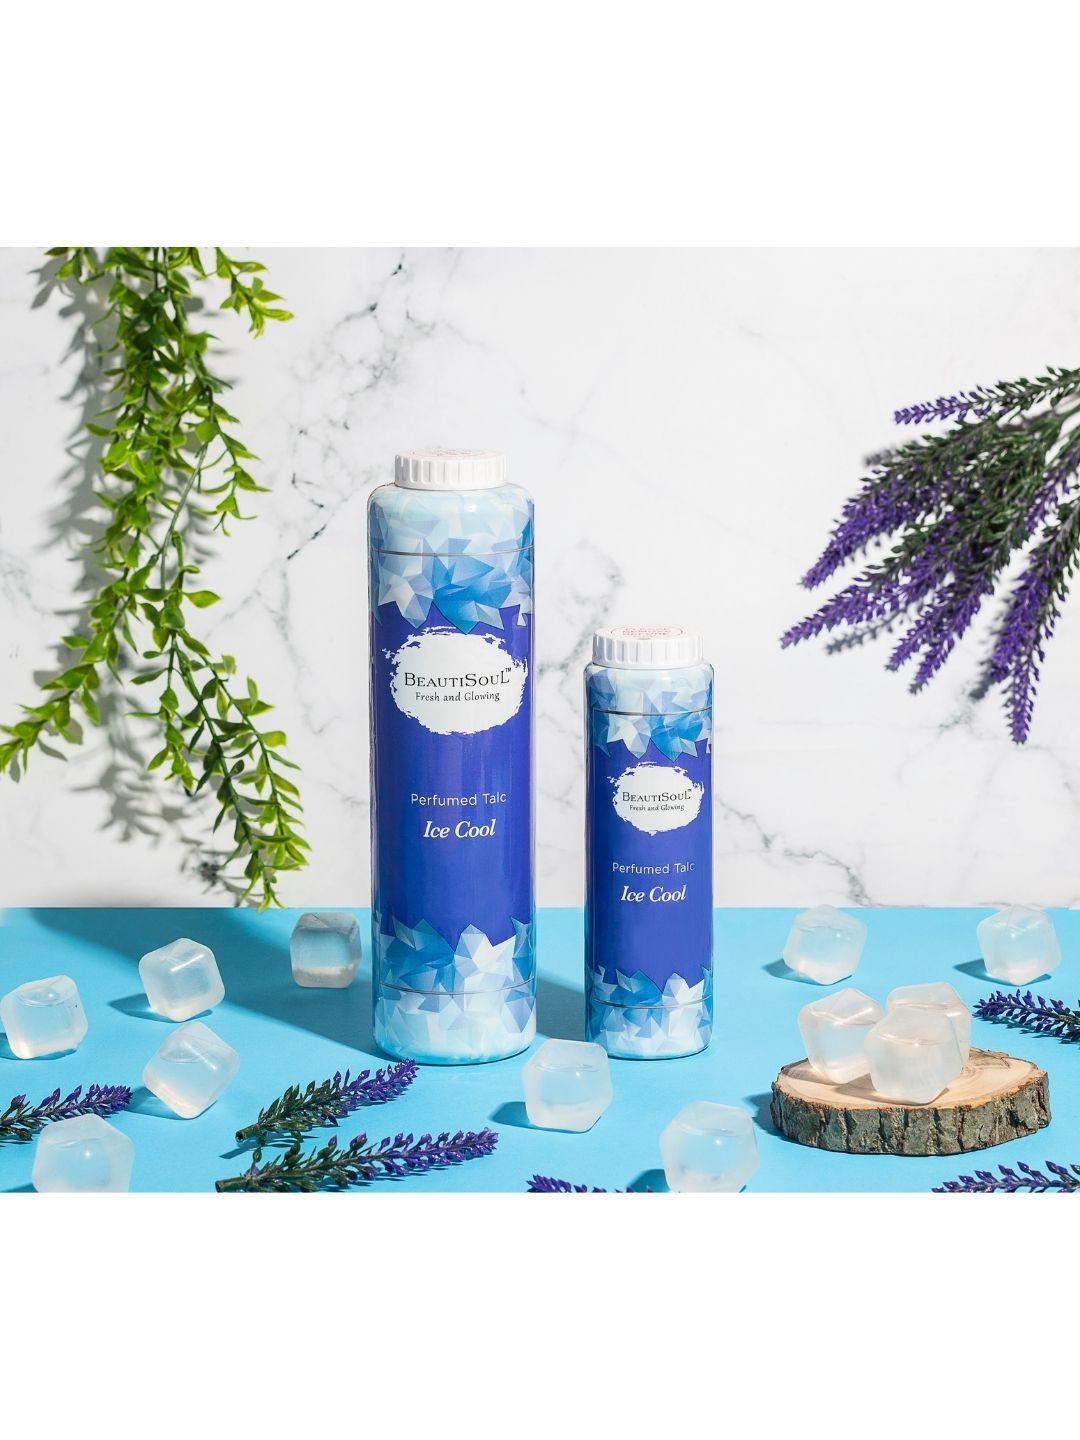 beautisoul set of 2 ice cool perfumed talcs